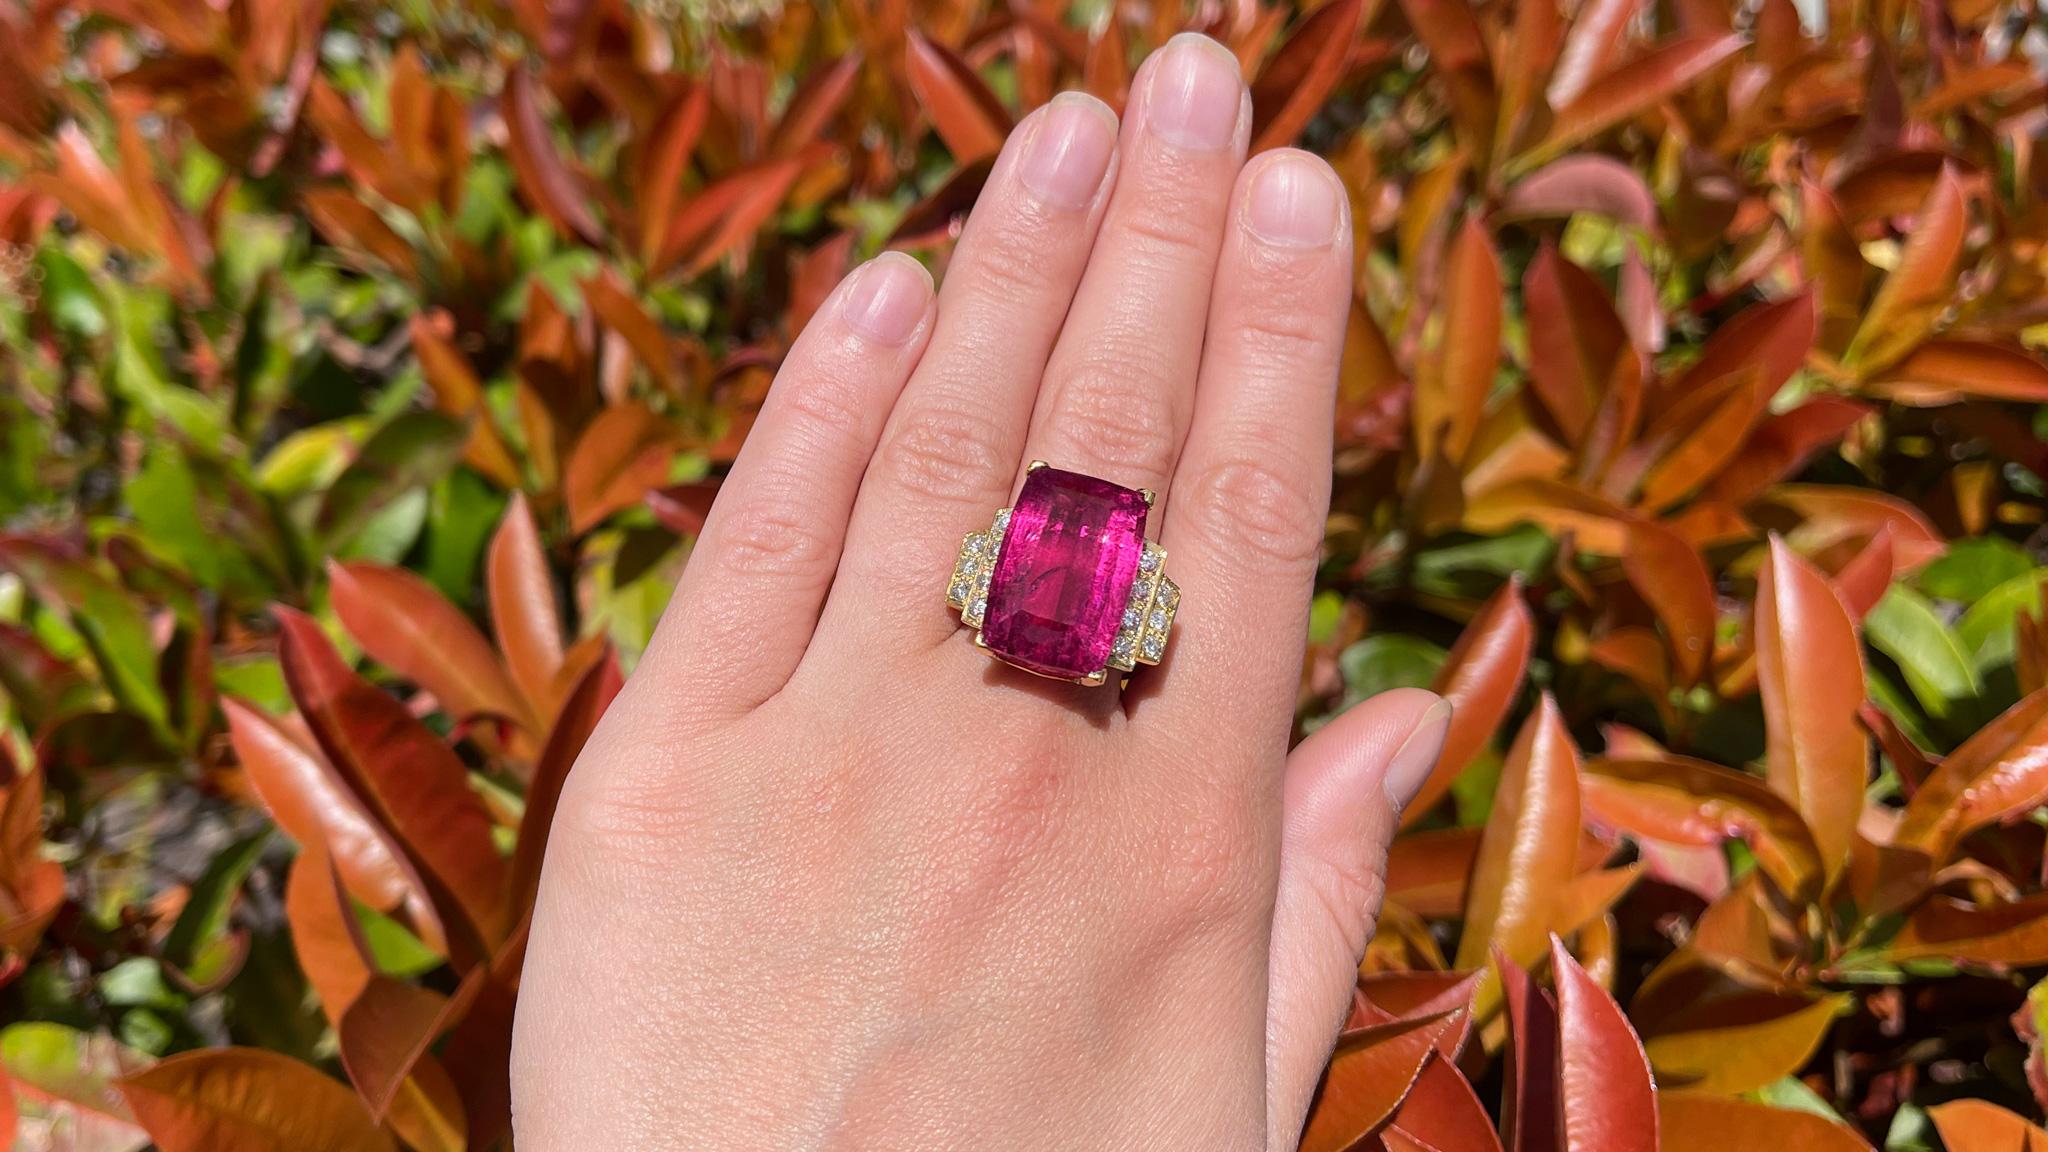 GIA Certified Pink Tourmaline = 25.19 Carat
Diamonds = 0.80 Carats
( Color: F, Clarity: VS )
Metal: 14K Yellow Gold
Ring Size: 9.5* US
*It can be resized complimentary.